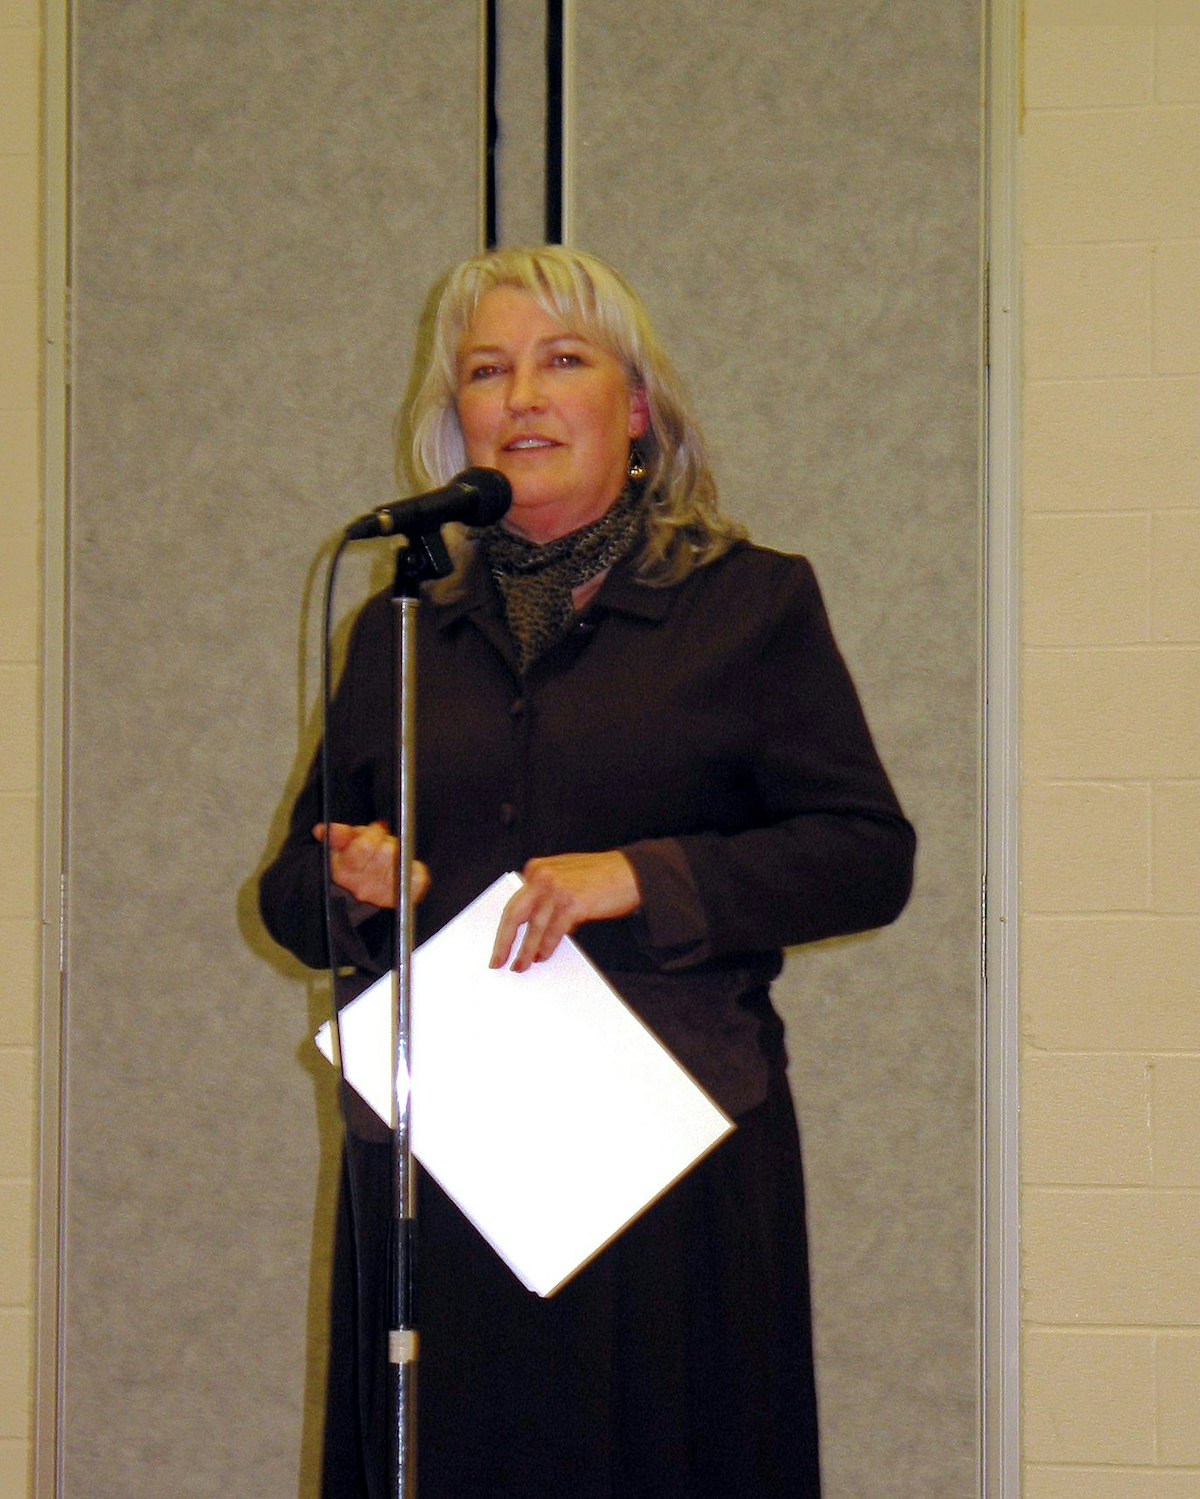 Cora McNamara, the principal of Nancy Campbell Collegiate, speaking about the importance of the role of teachers to a teacher appreciation gathering in Ontario, Canada.